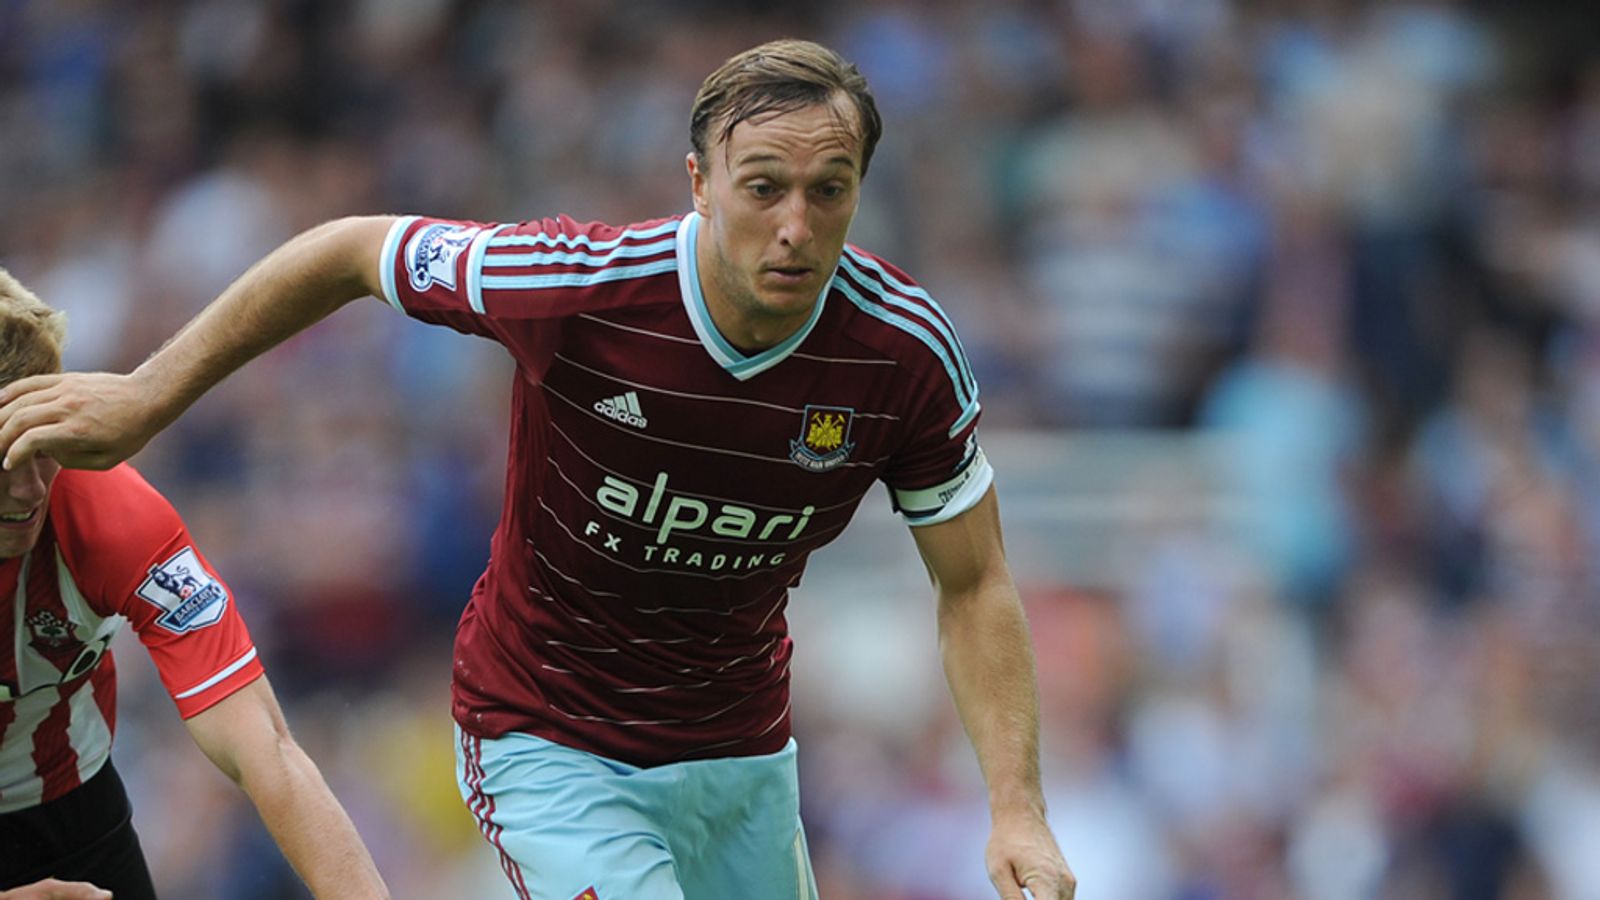 West Ham transfer news: Mark Noble signs new three-year contract